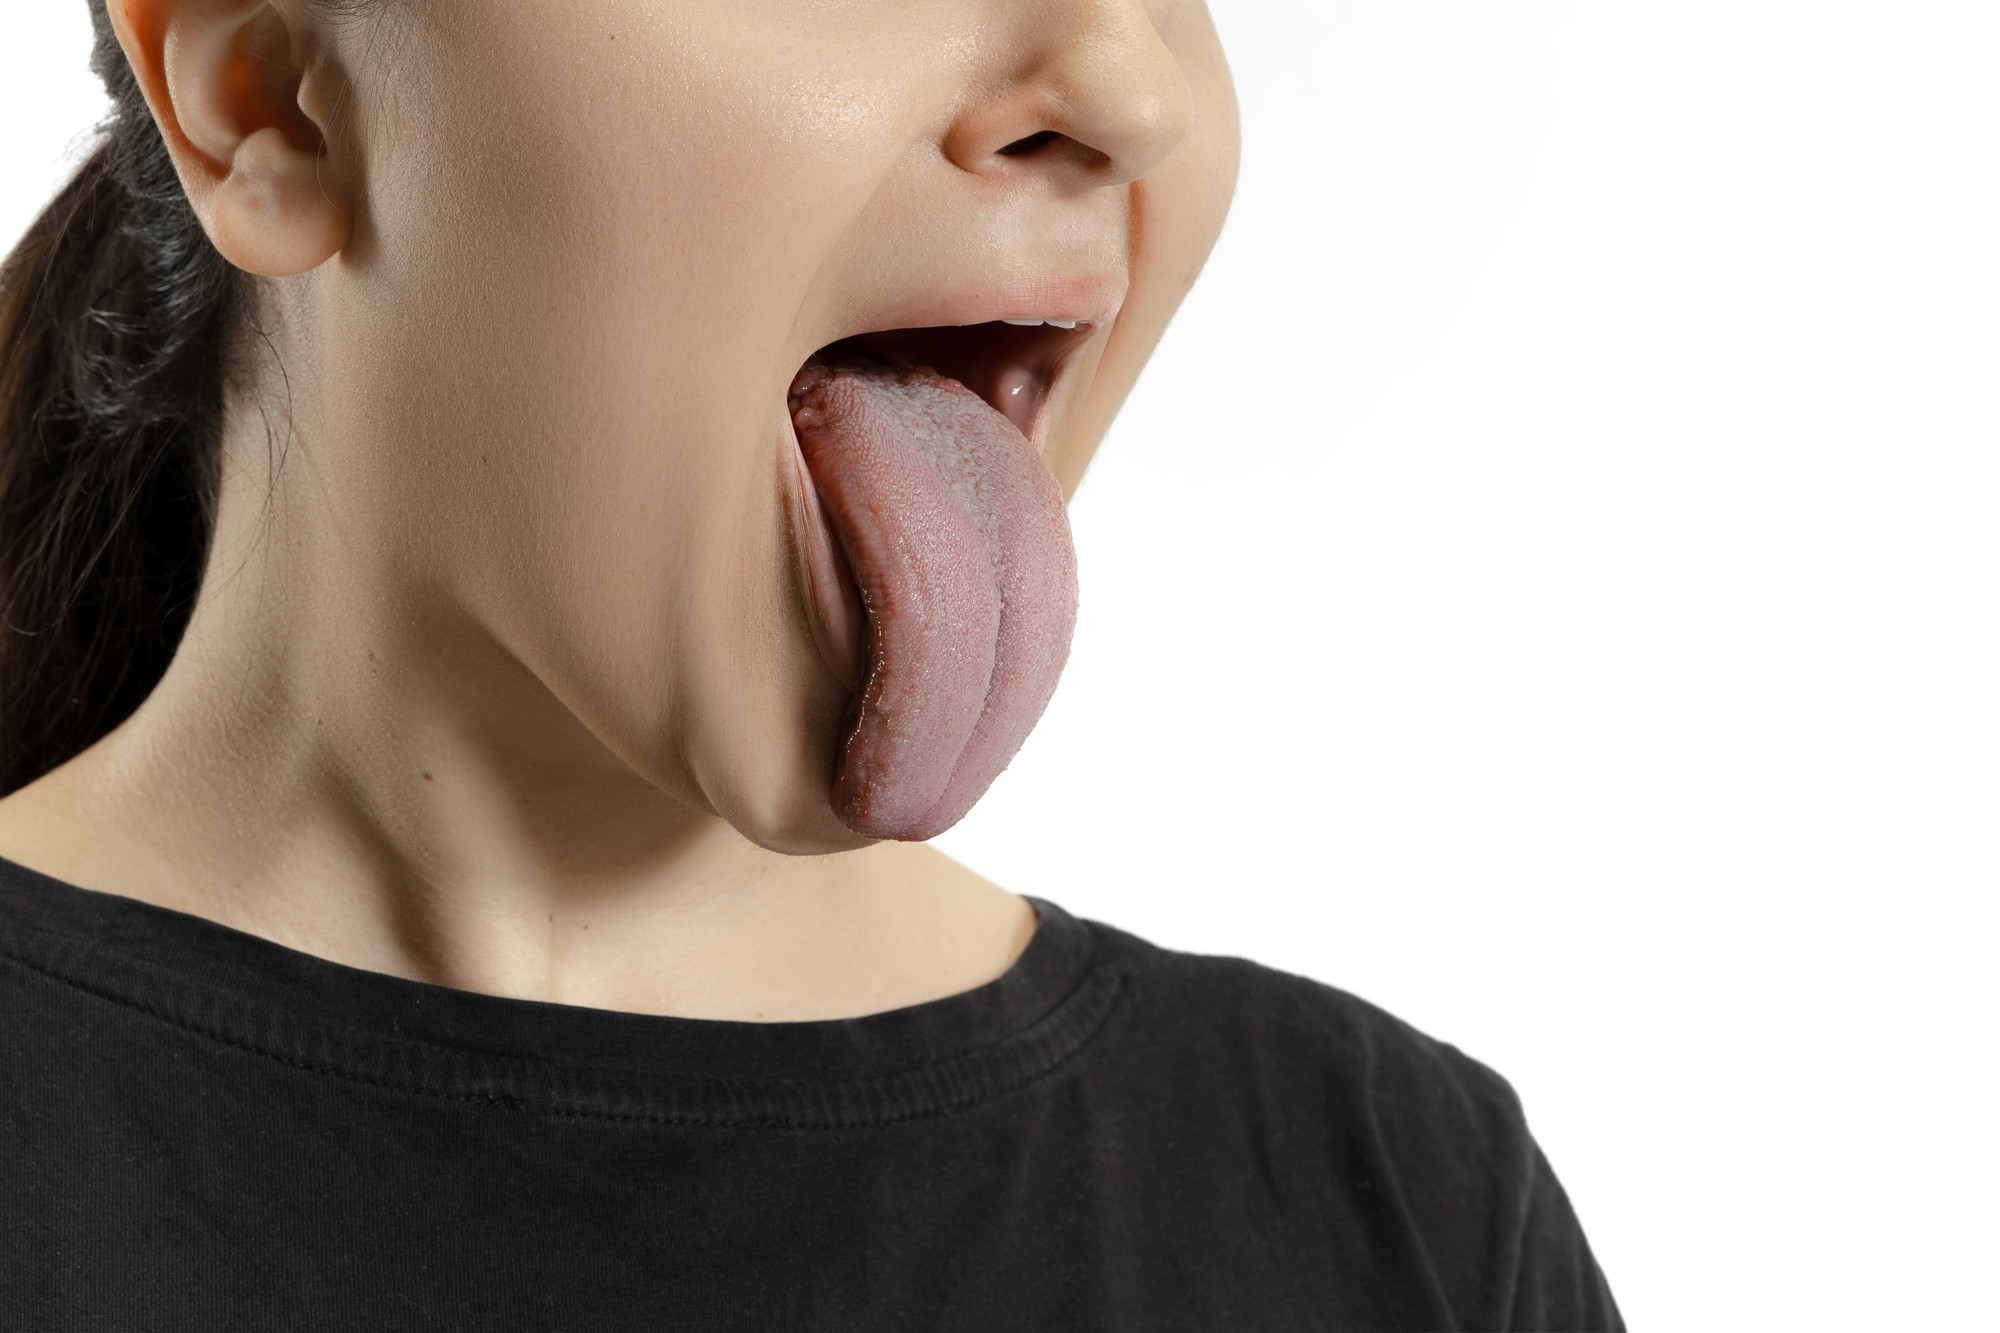 Tongue Signs Of Health Problems – How To Interpret Them For Good Diagnosis